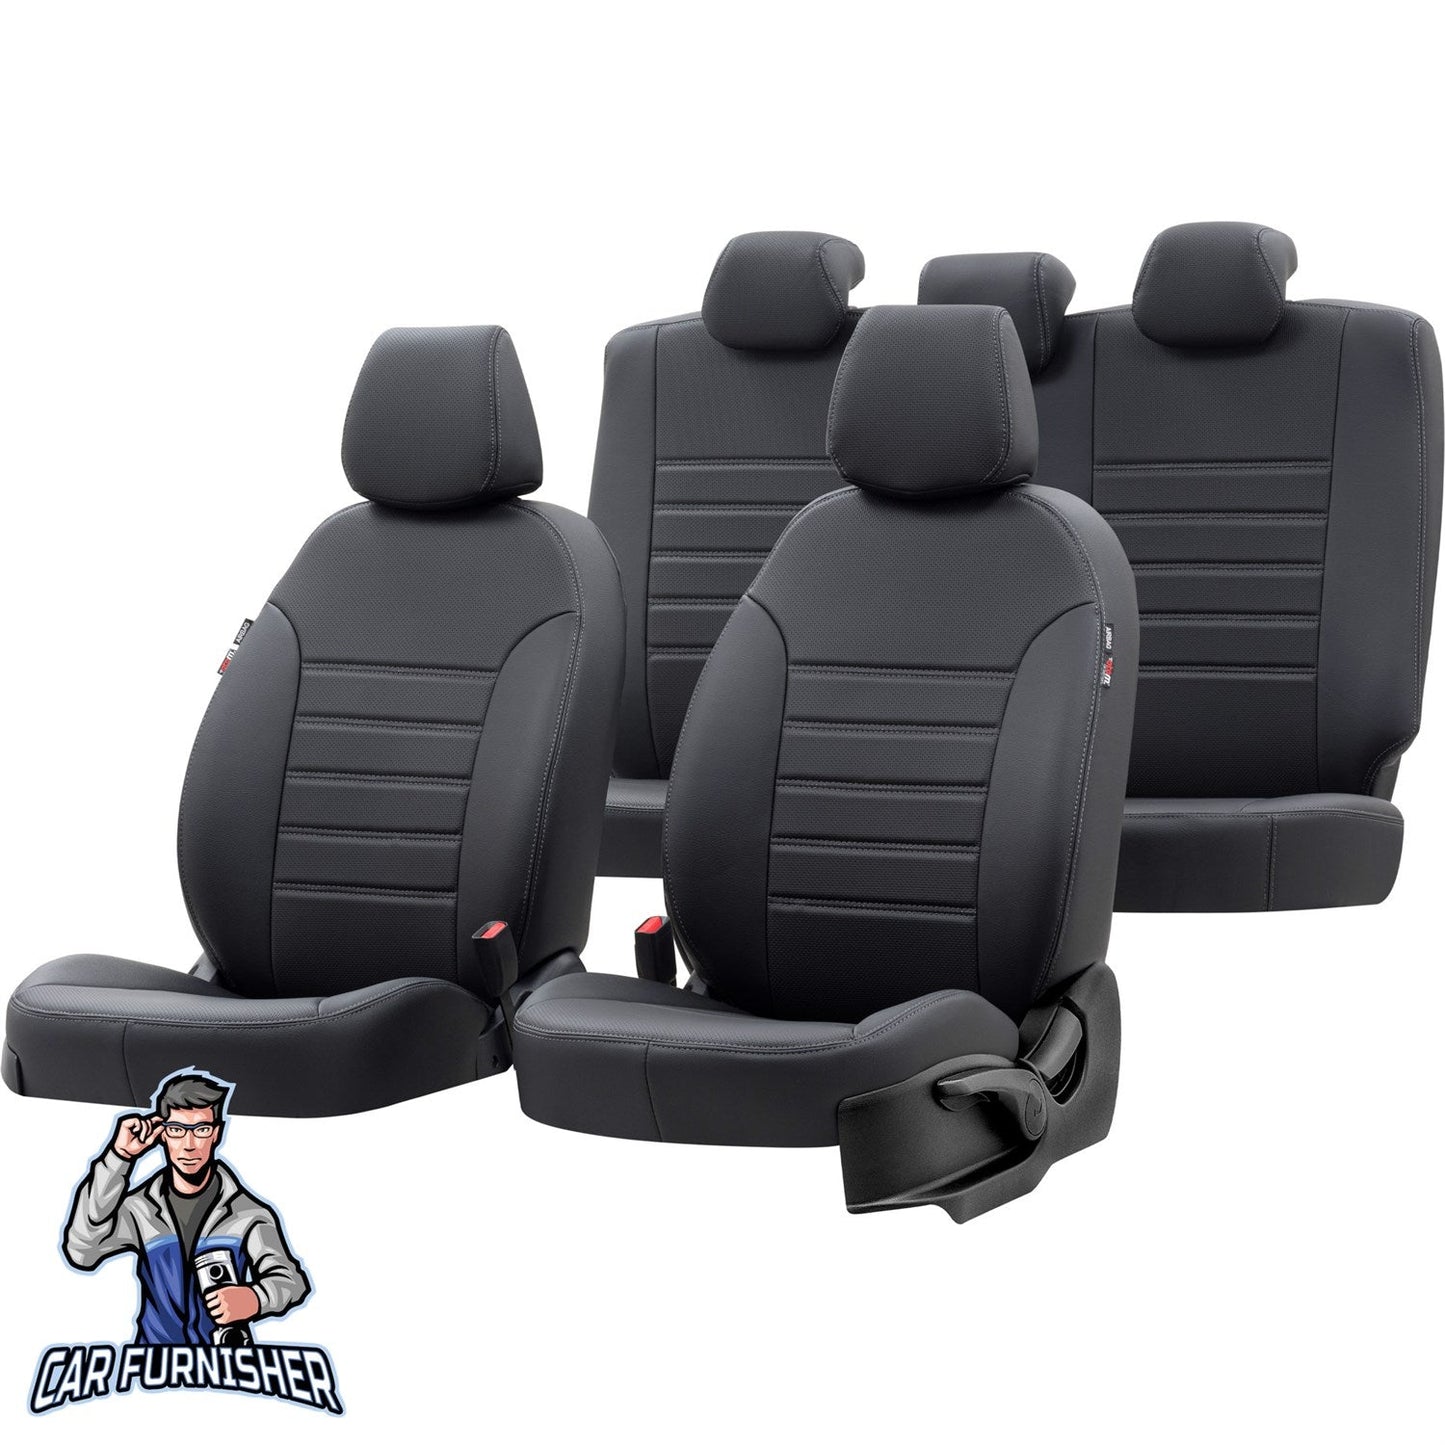 Kia Soul Seat Covers New York Leather Design Black Leather